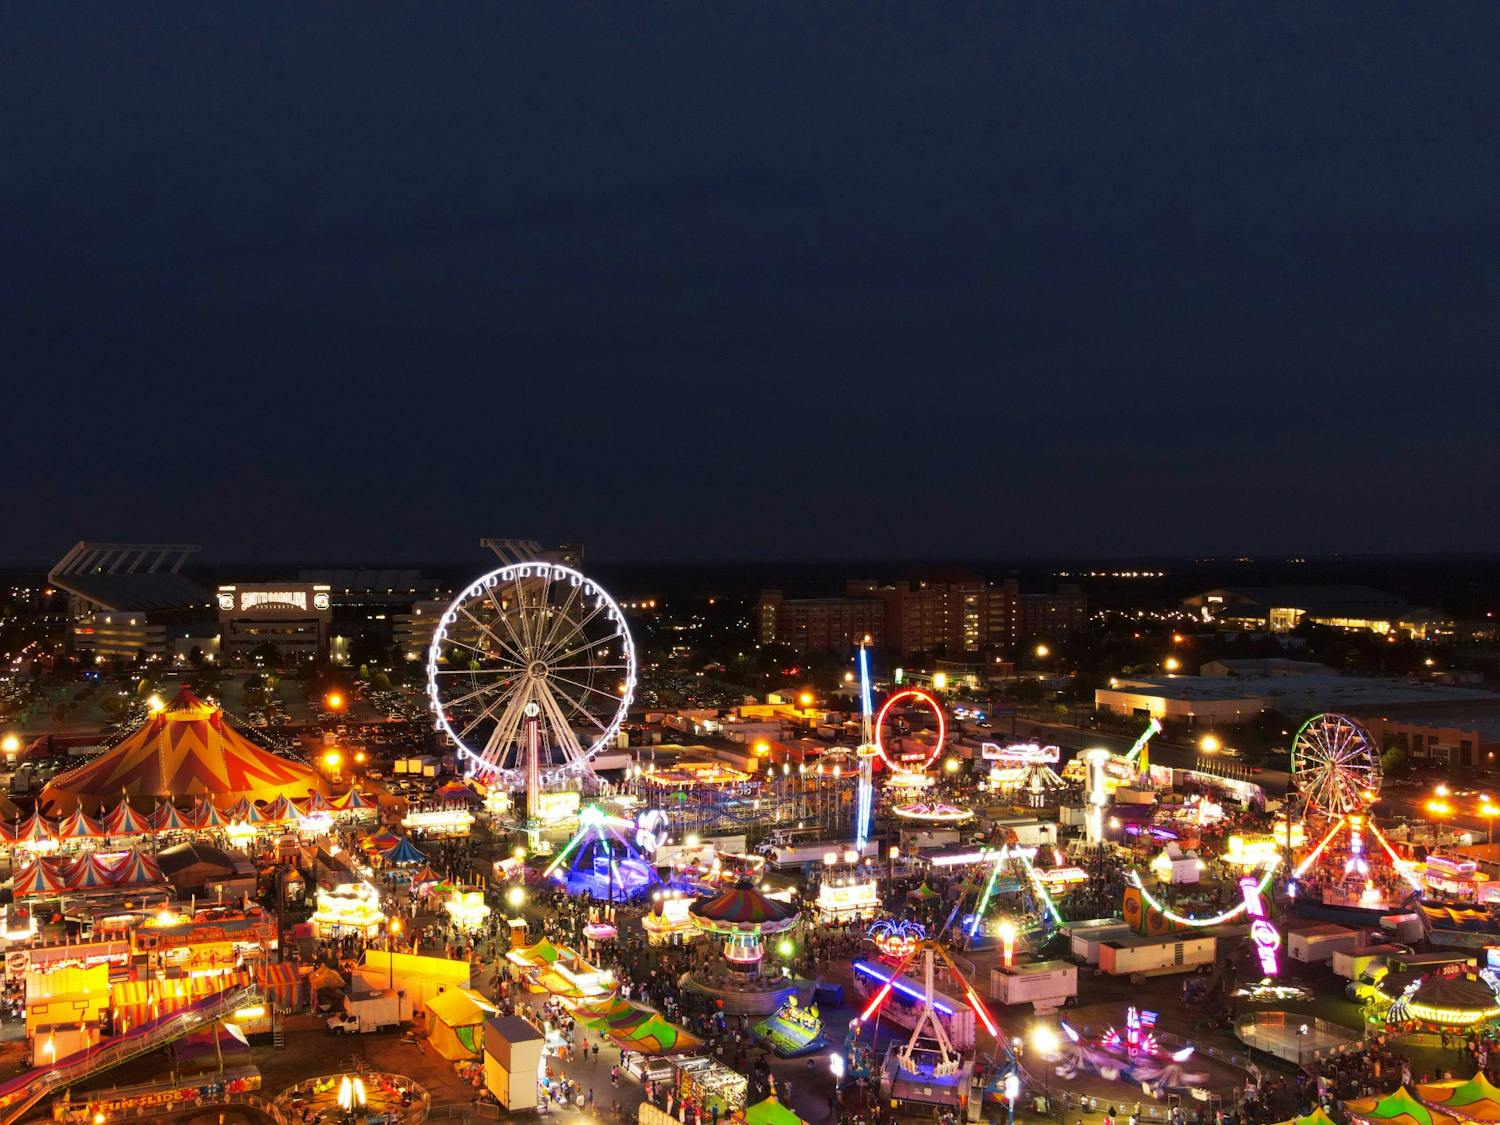 An aerial view of the Ferris wheel, food stands, rides and games of the 152nd State Fair.&nbsp;